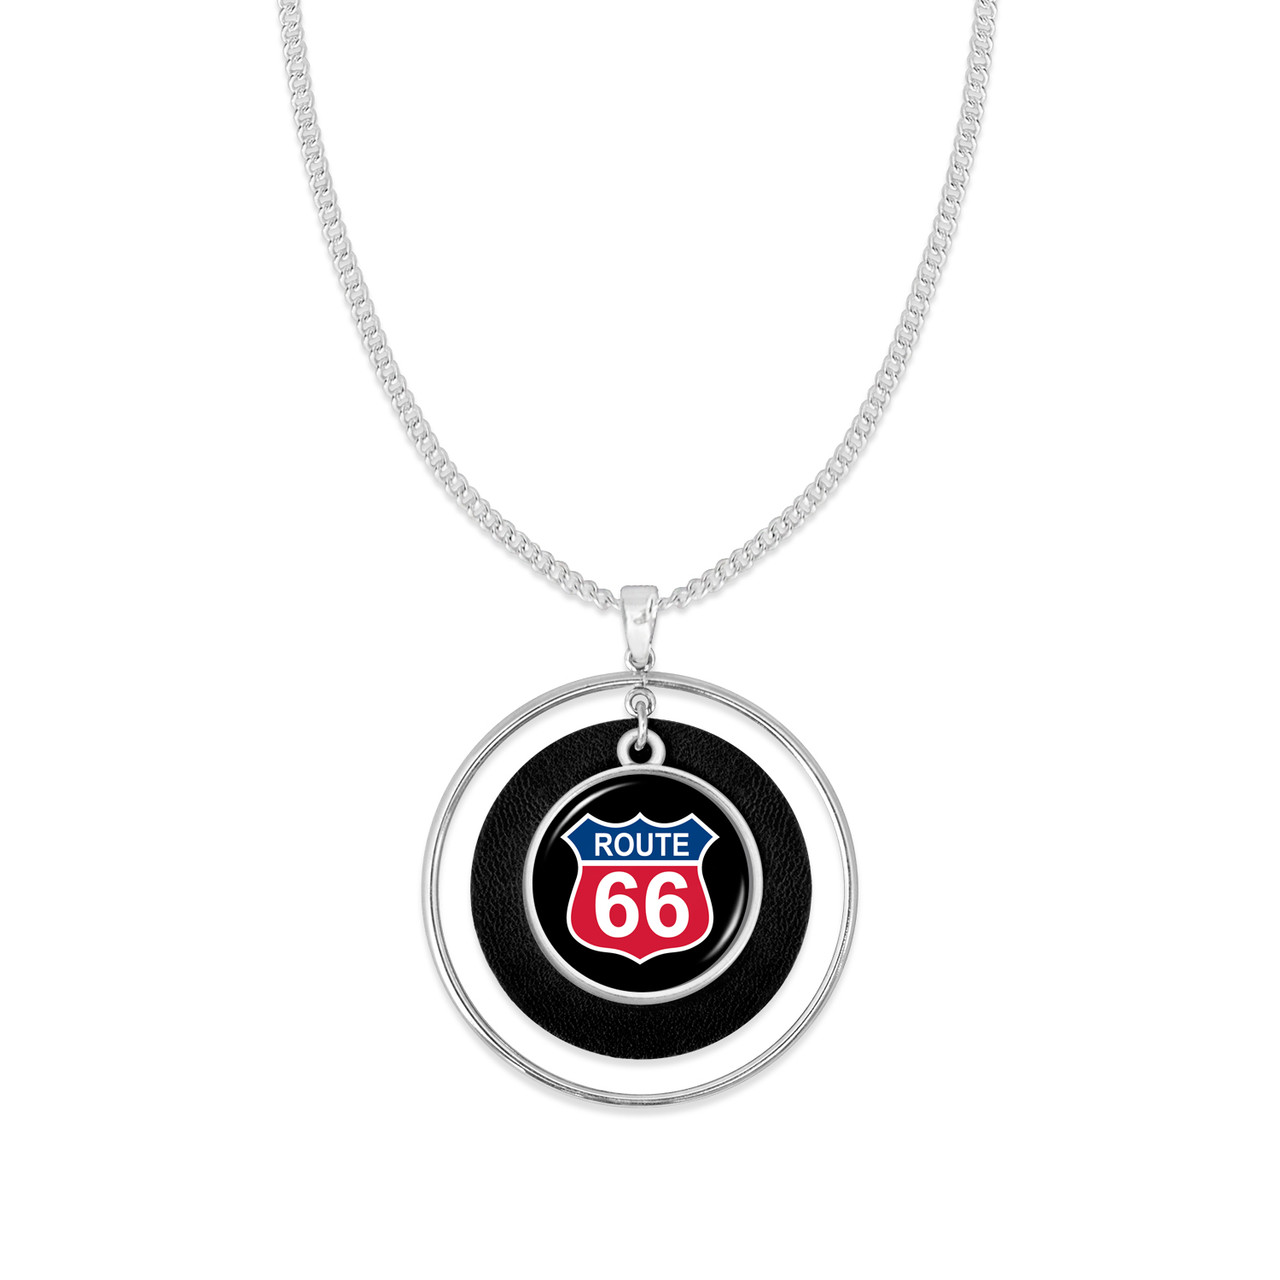 Route 66 Lindy Necklace